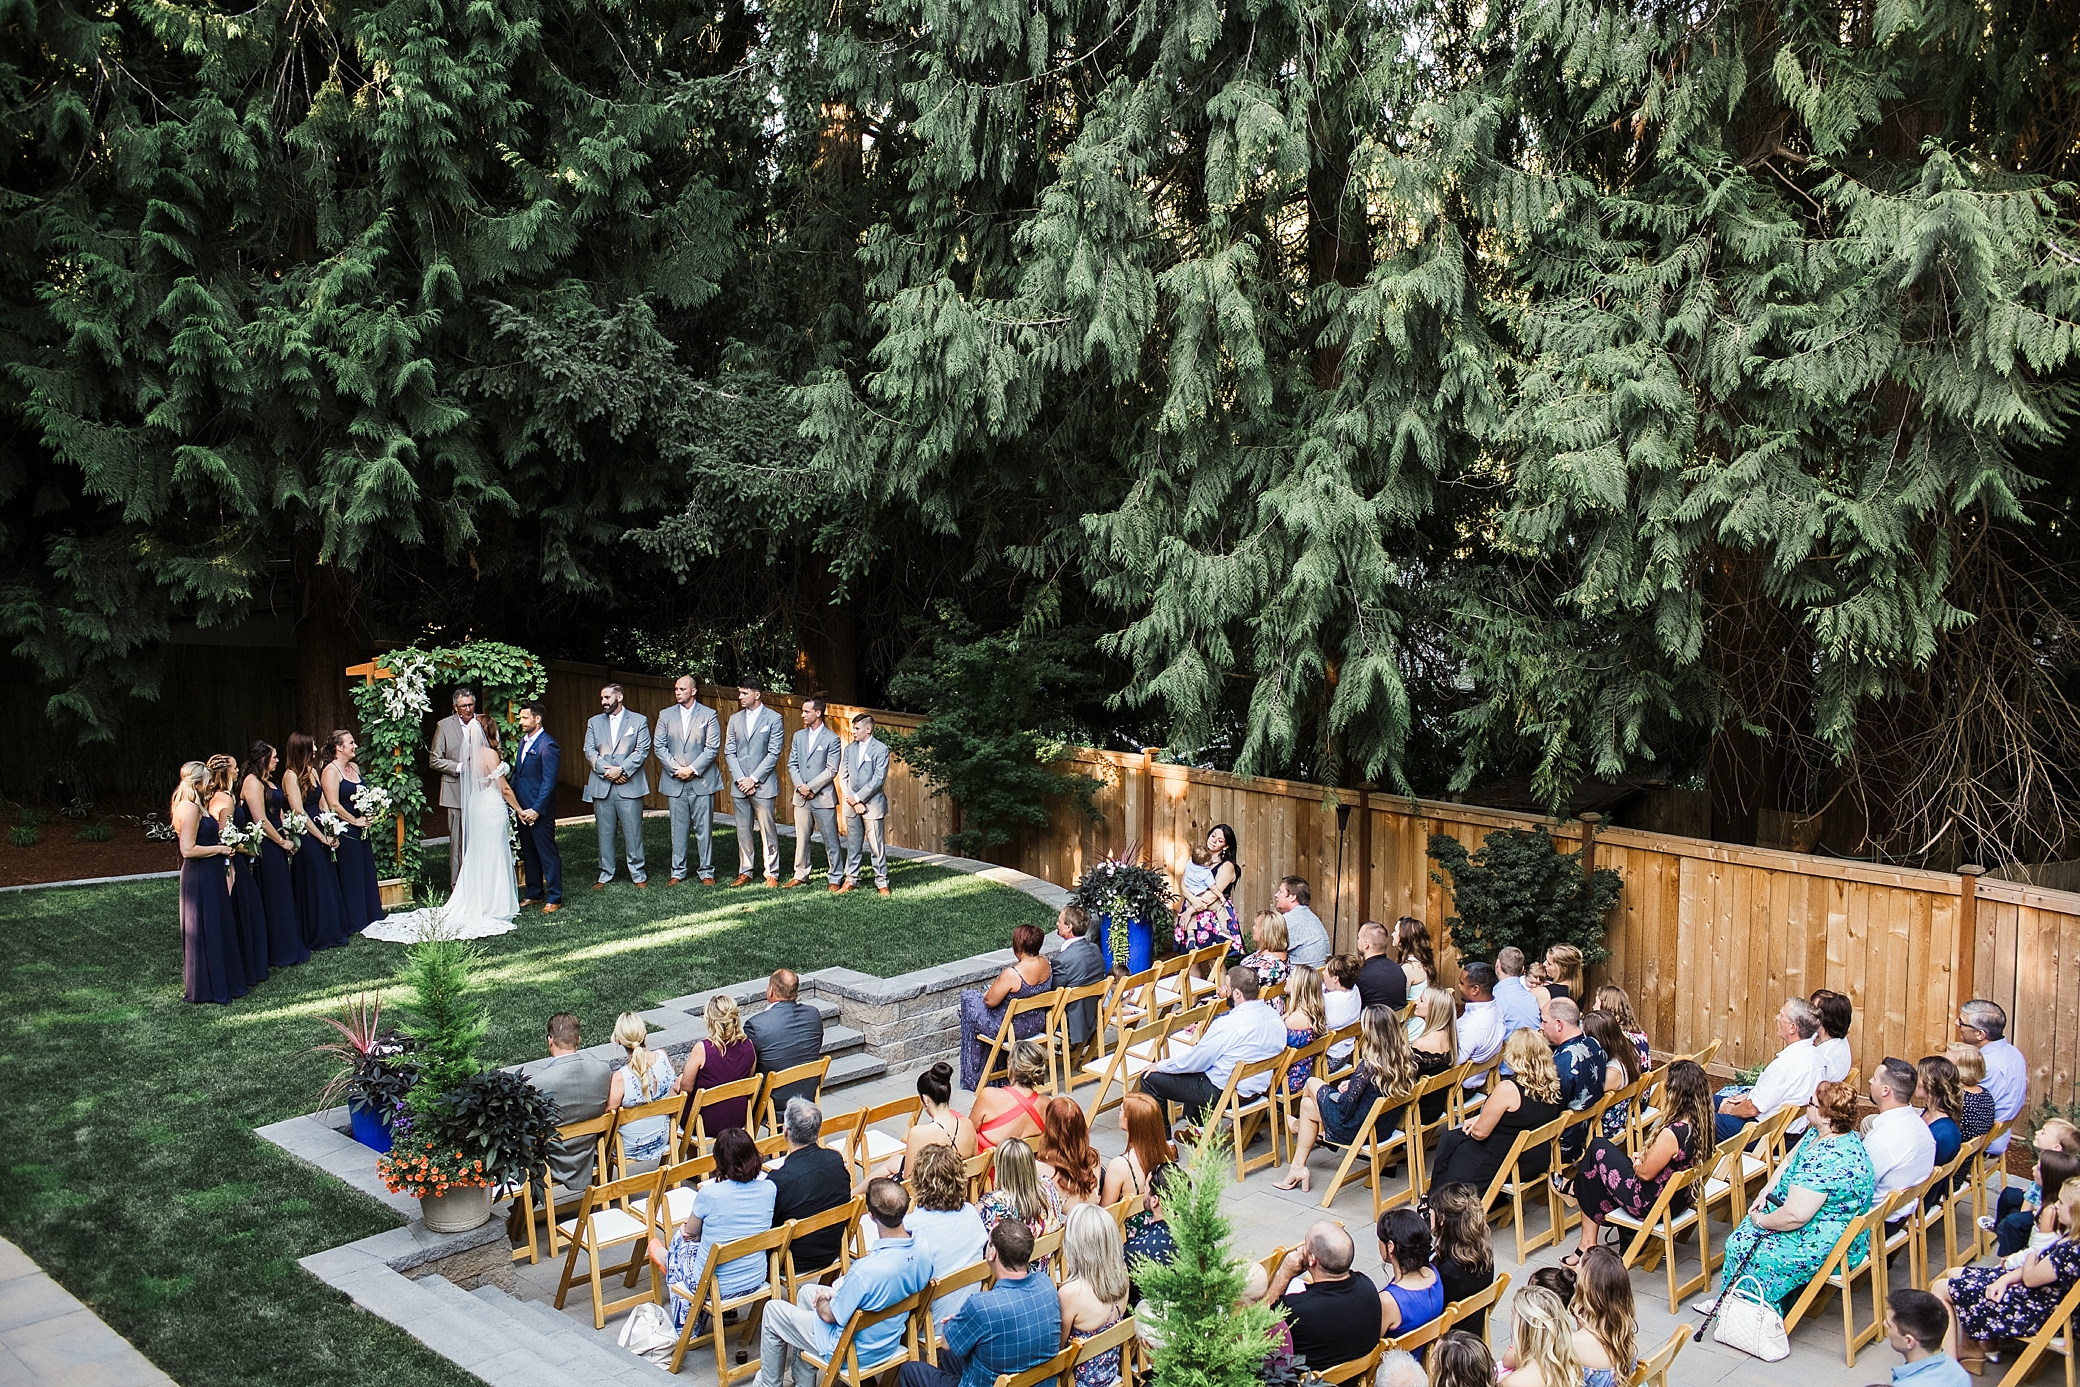 Intimate backyard wedding at the bride and grooms home in Tacoma, WA. Photographed by Tacoma Intimate Wedding Photographer, Megan Montalvo Photography